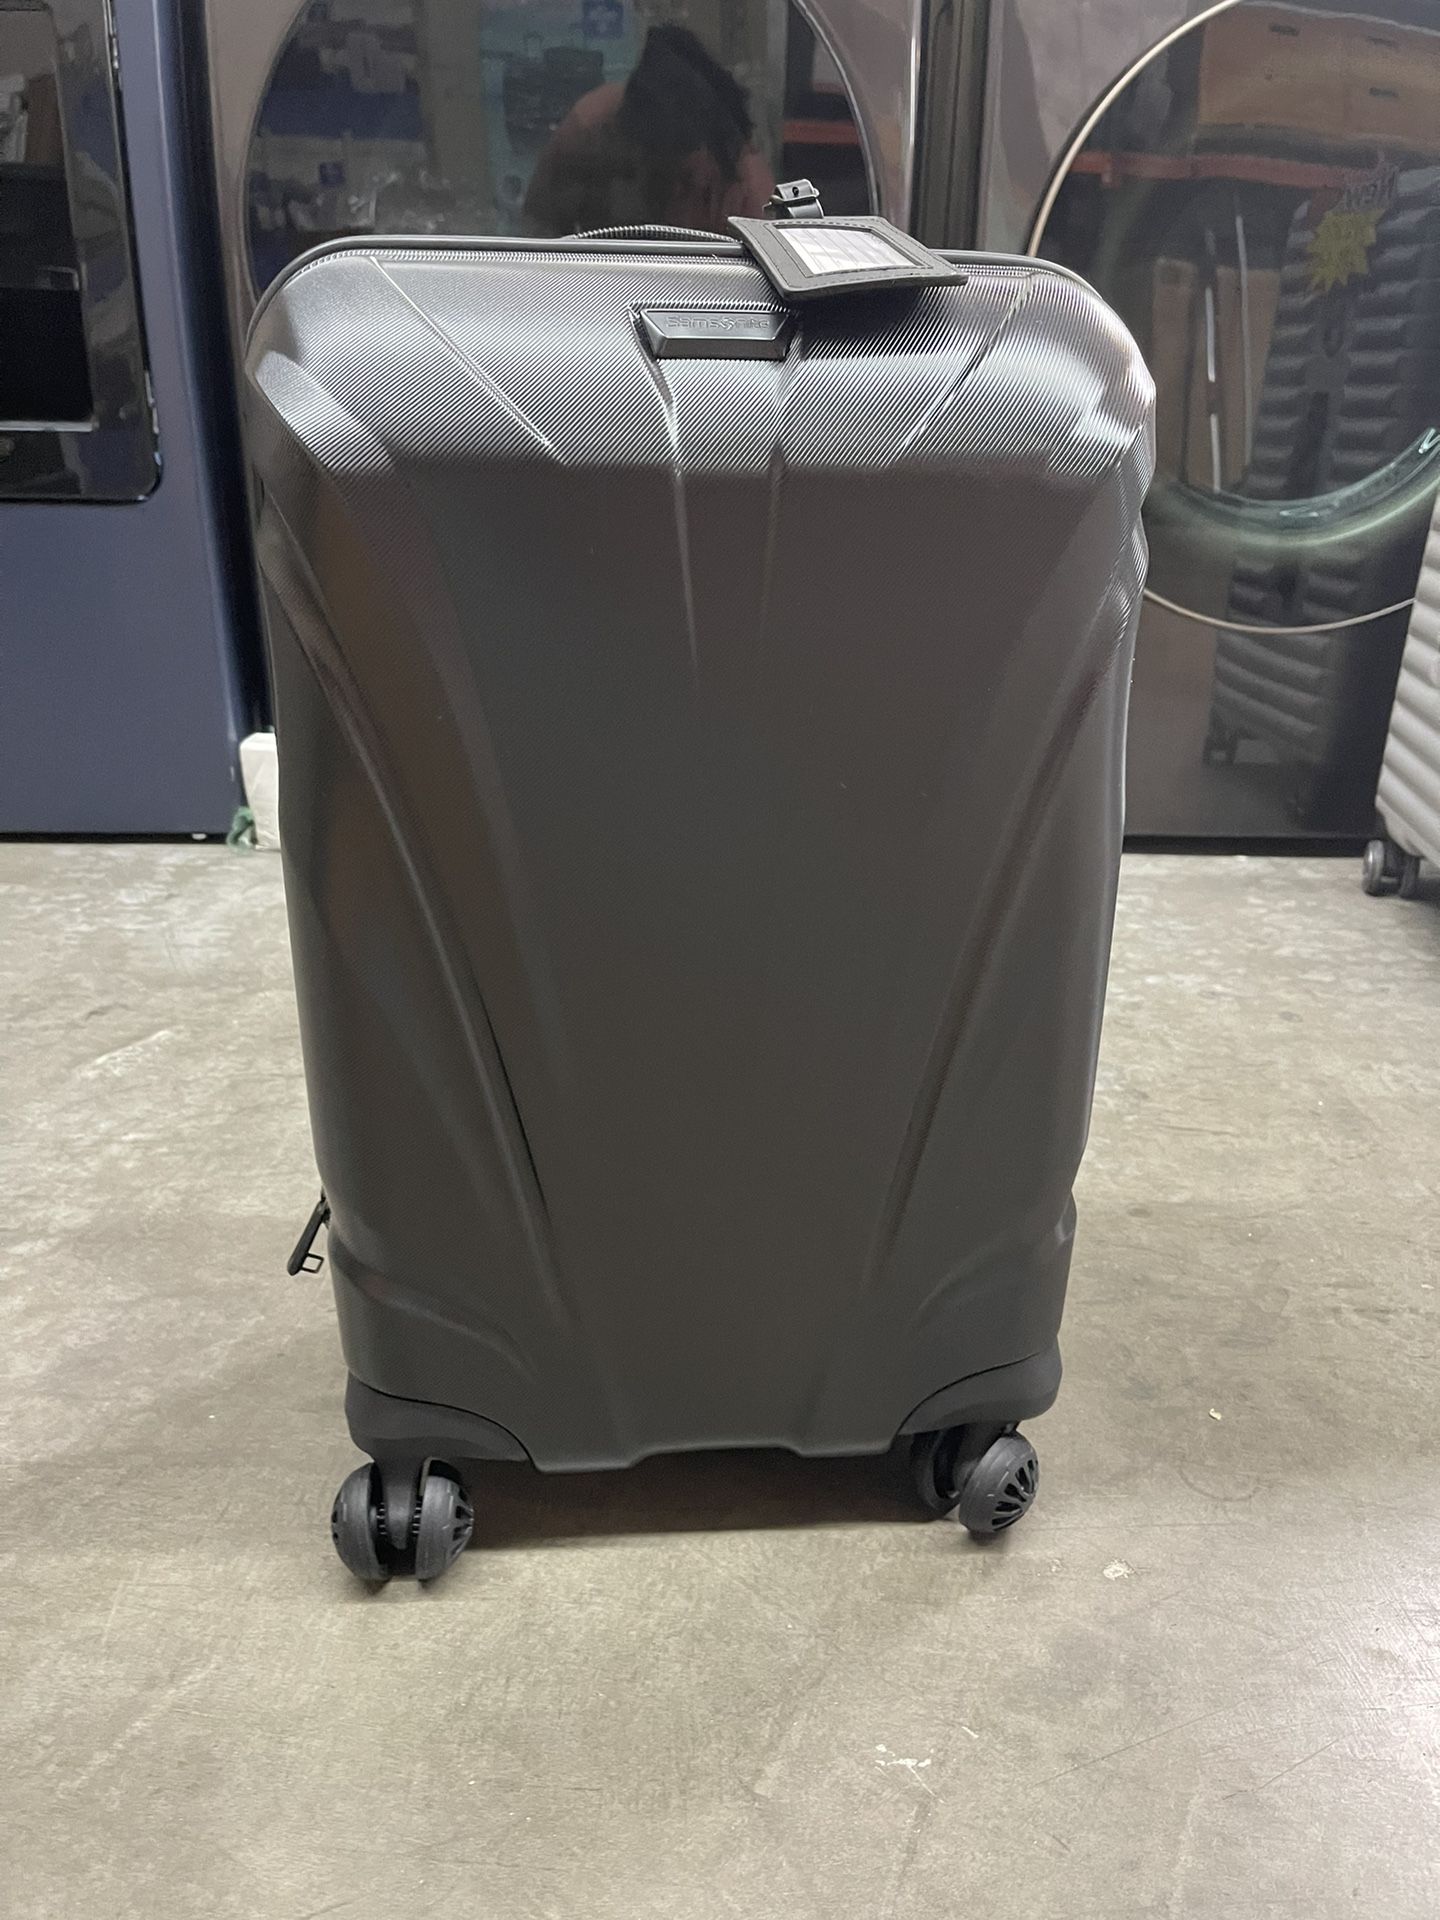 Delsey 2 Piece Hardside Luggage Set 4 Wheel Spinner in Silver